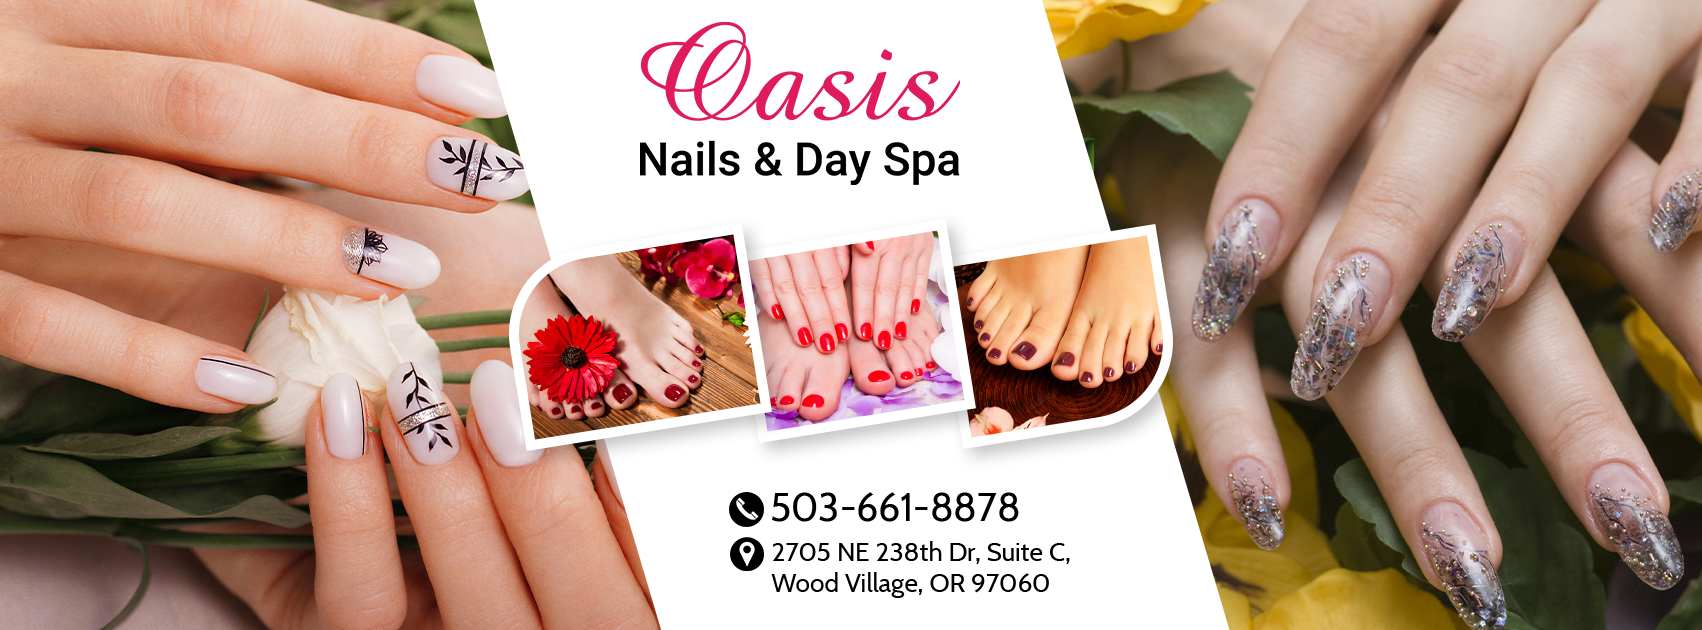 Oasis Nails & Day Spa Get $10 Gift Certificate When Spend Service $70+ 2705 NE 238th Dr, Wood Village Oregon 97060